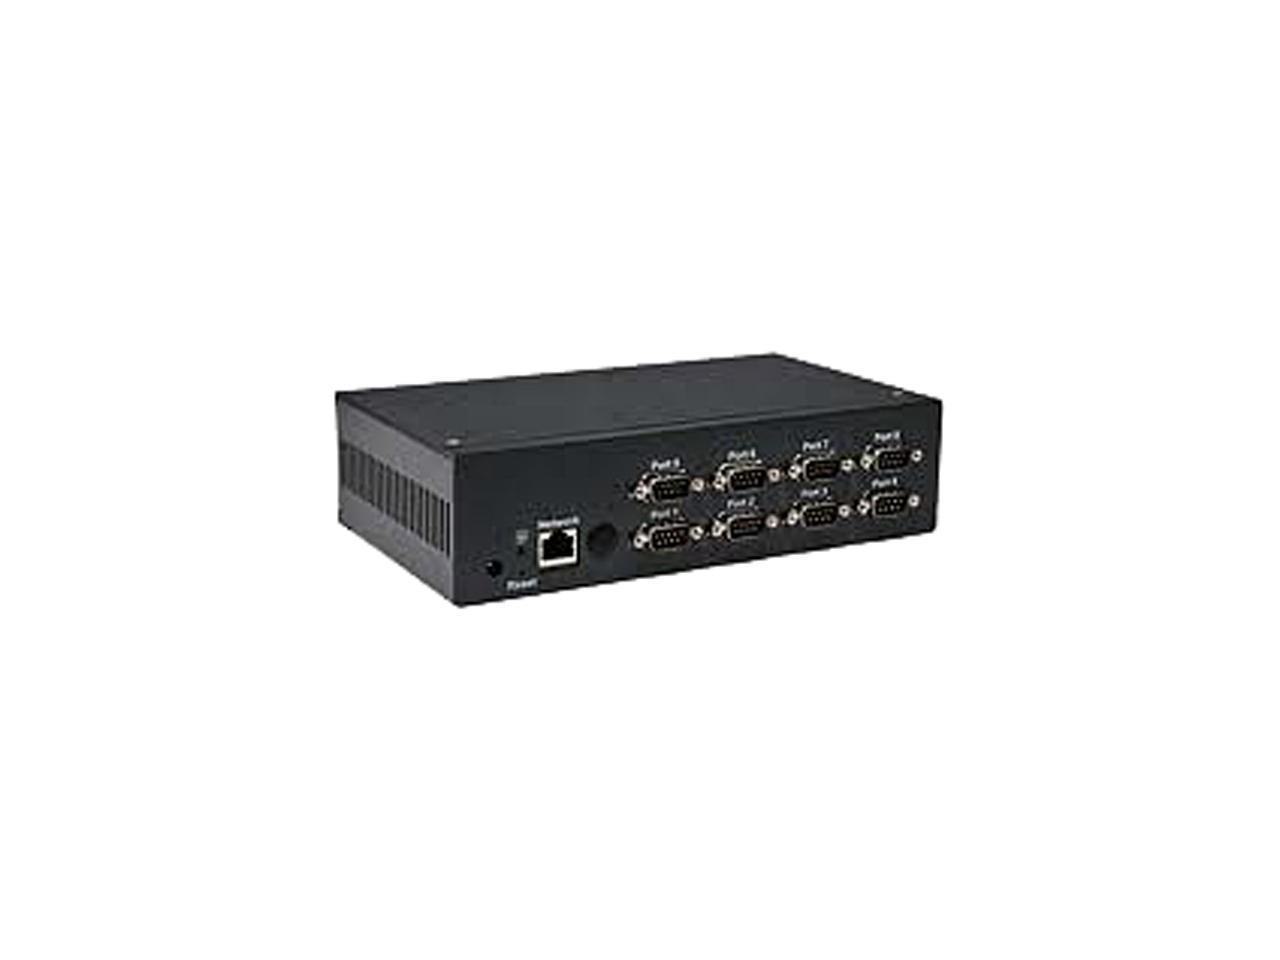 Brainboxes Es-279 8Port RS232 Ethernet To